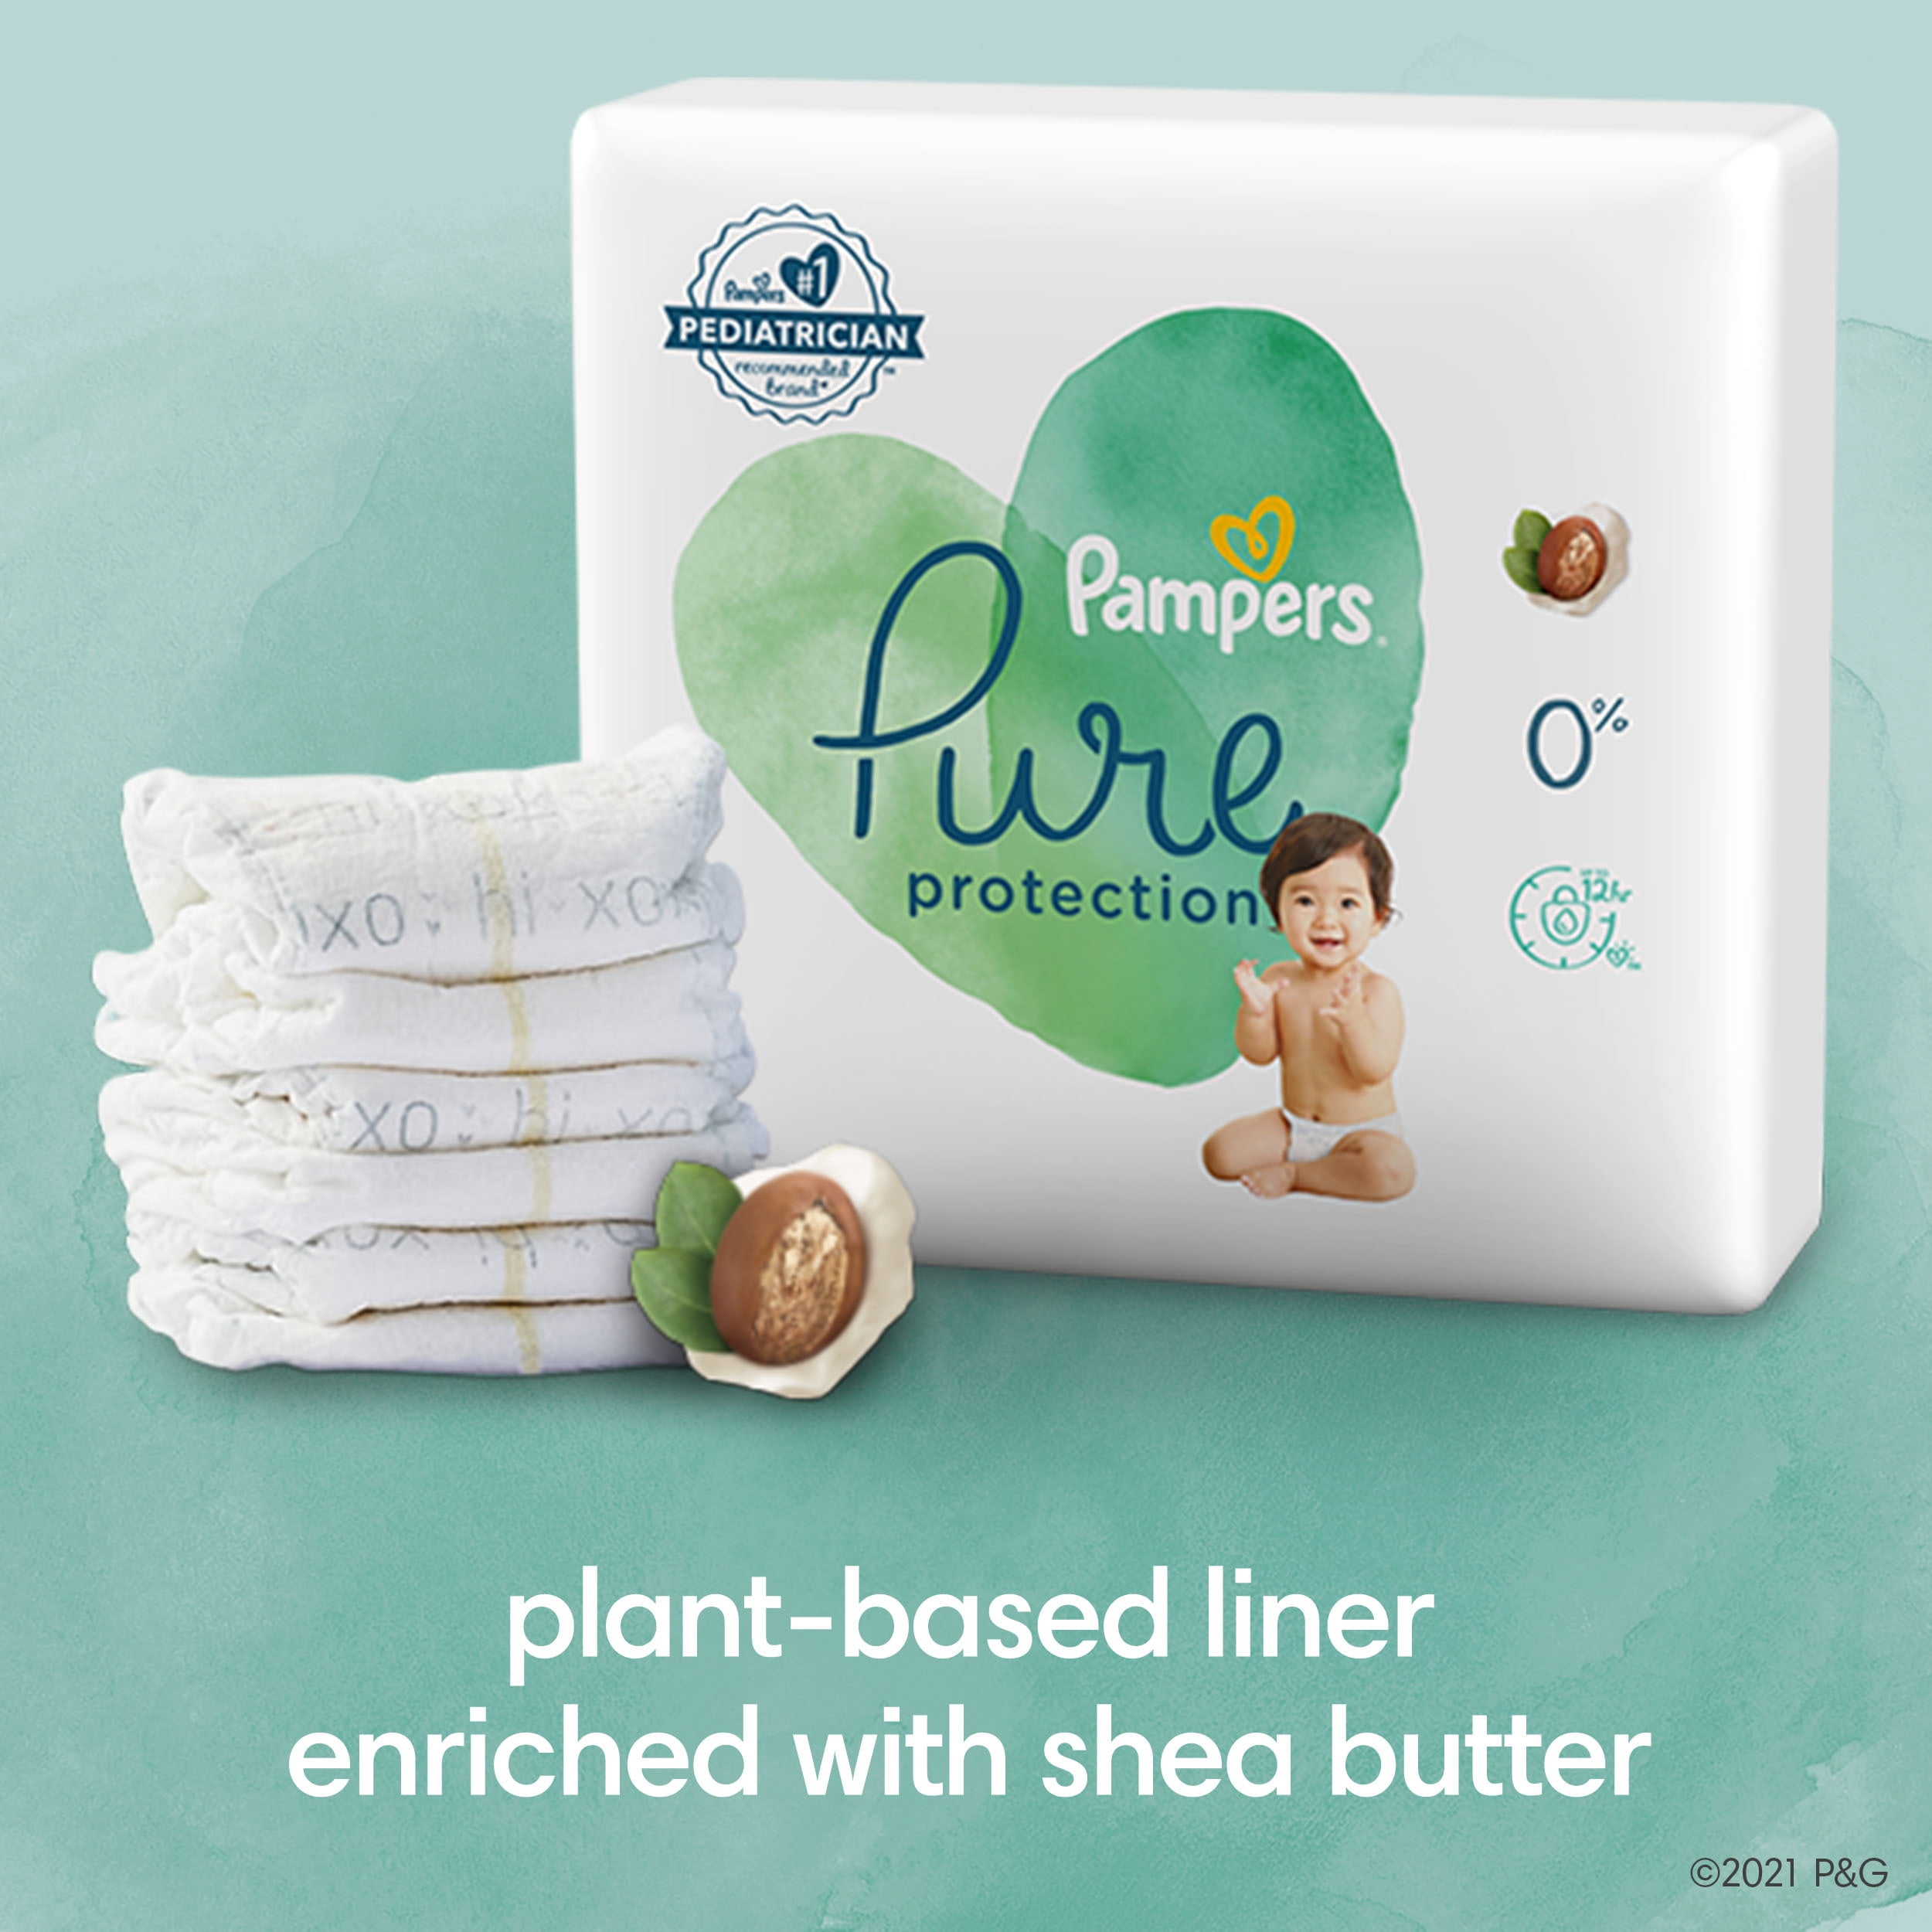 Pampers Pure Protection Natural Newborn Diapers, Size 1, 132 Ct - 2